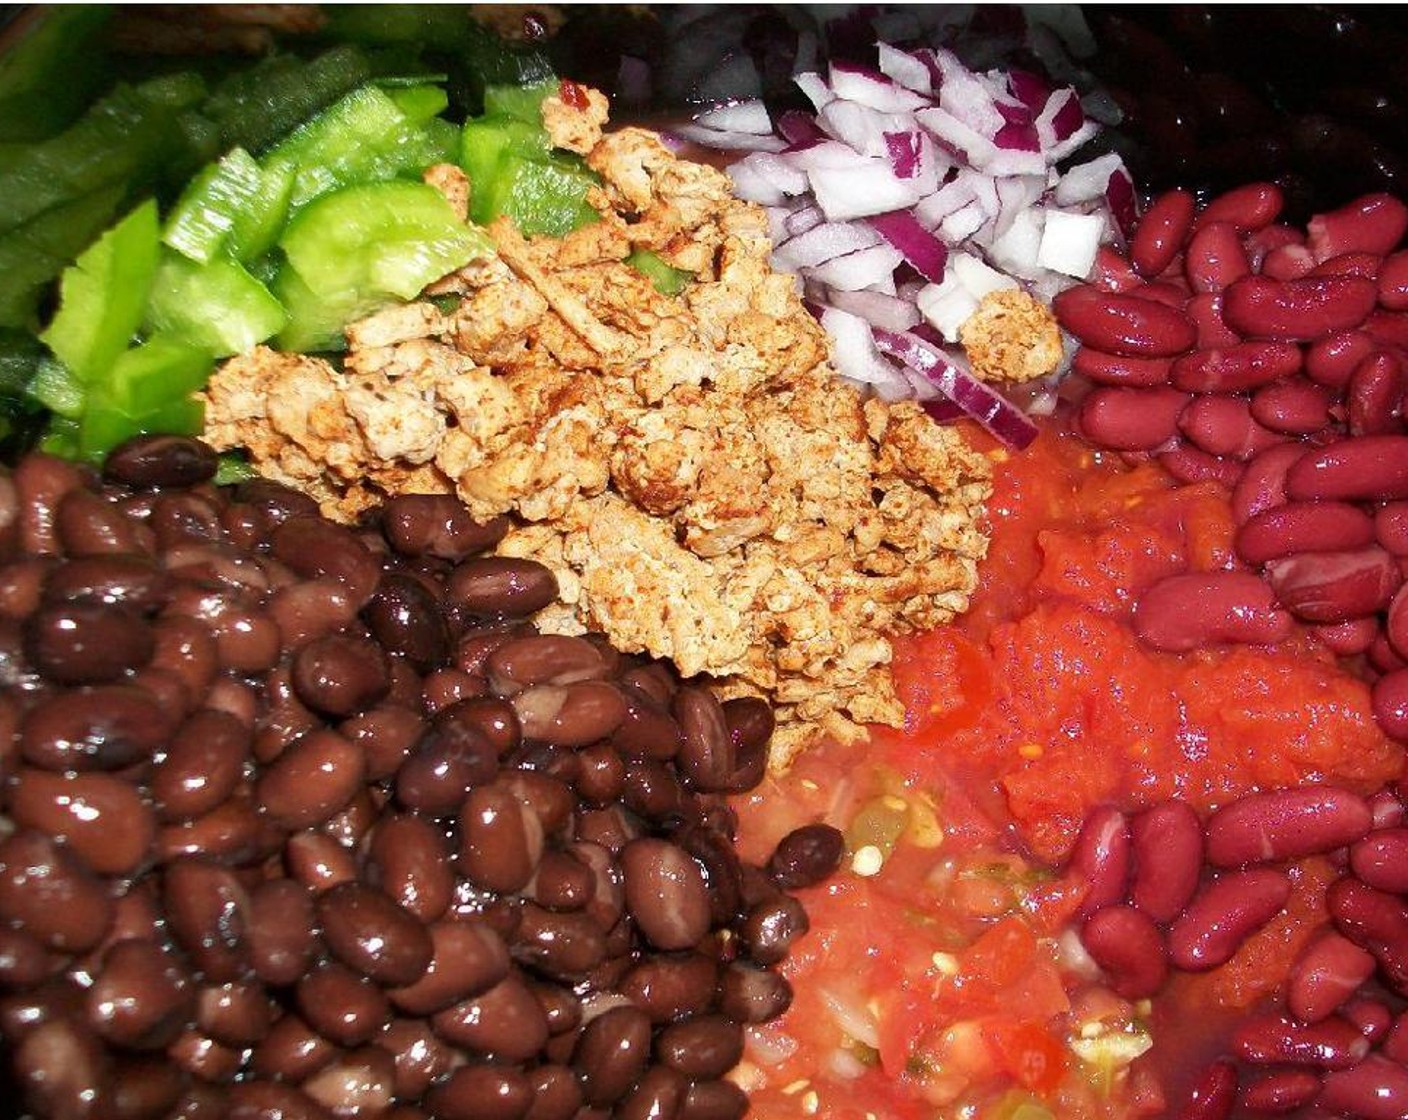 step 2 Place the browned and seasoned ground turkey in your pot. Now just pile in Onion (1), Green Bell Pepper (1/2), Diced Tomatoes (1 can), Salsa (1/4 cup), Black Beans (1 can), and Red Kidney Beans (1 can).